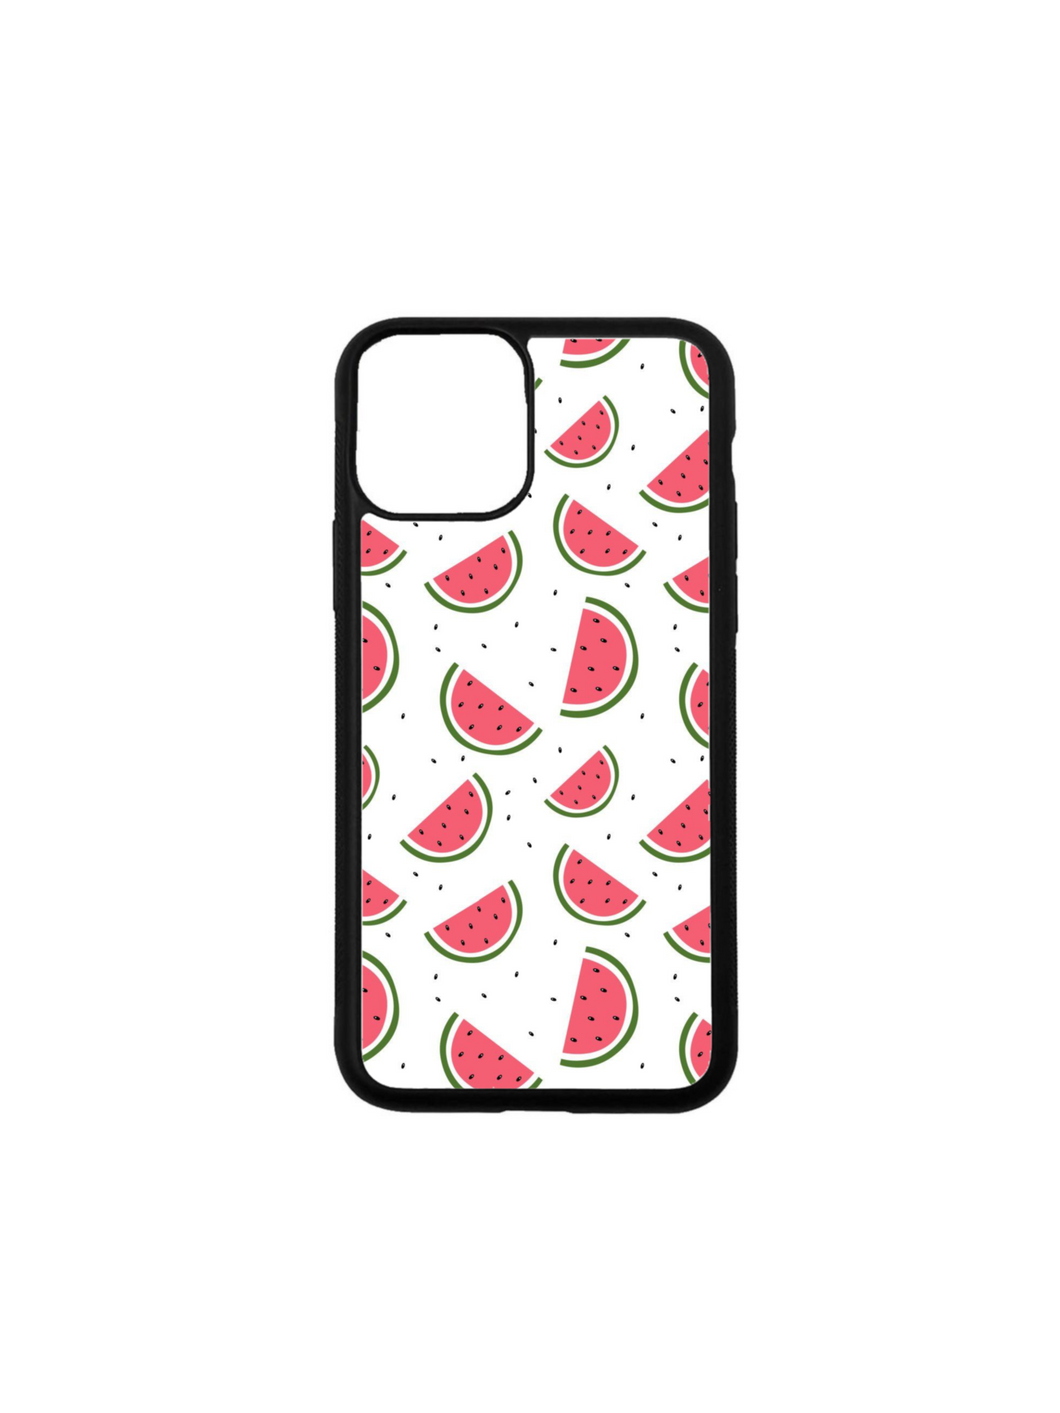 Watermelons case